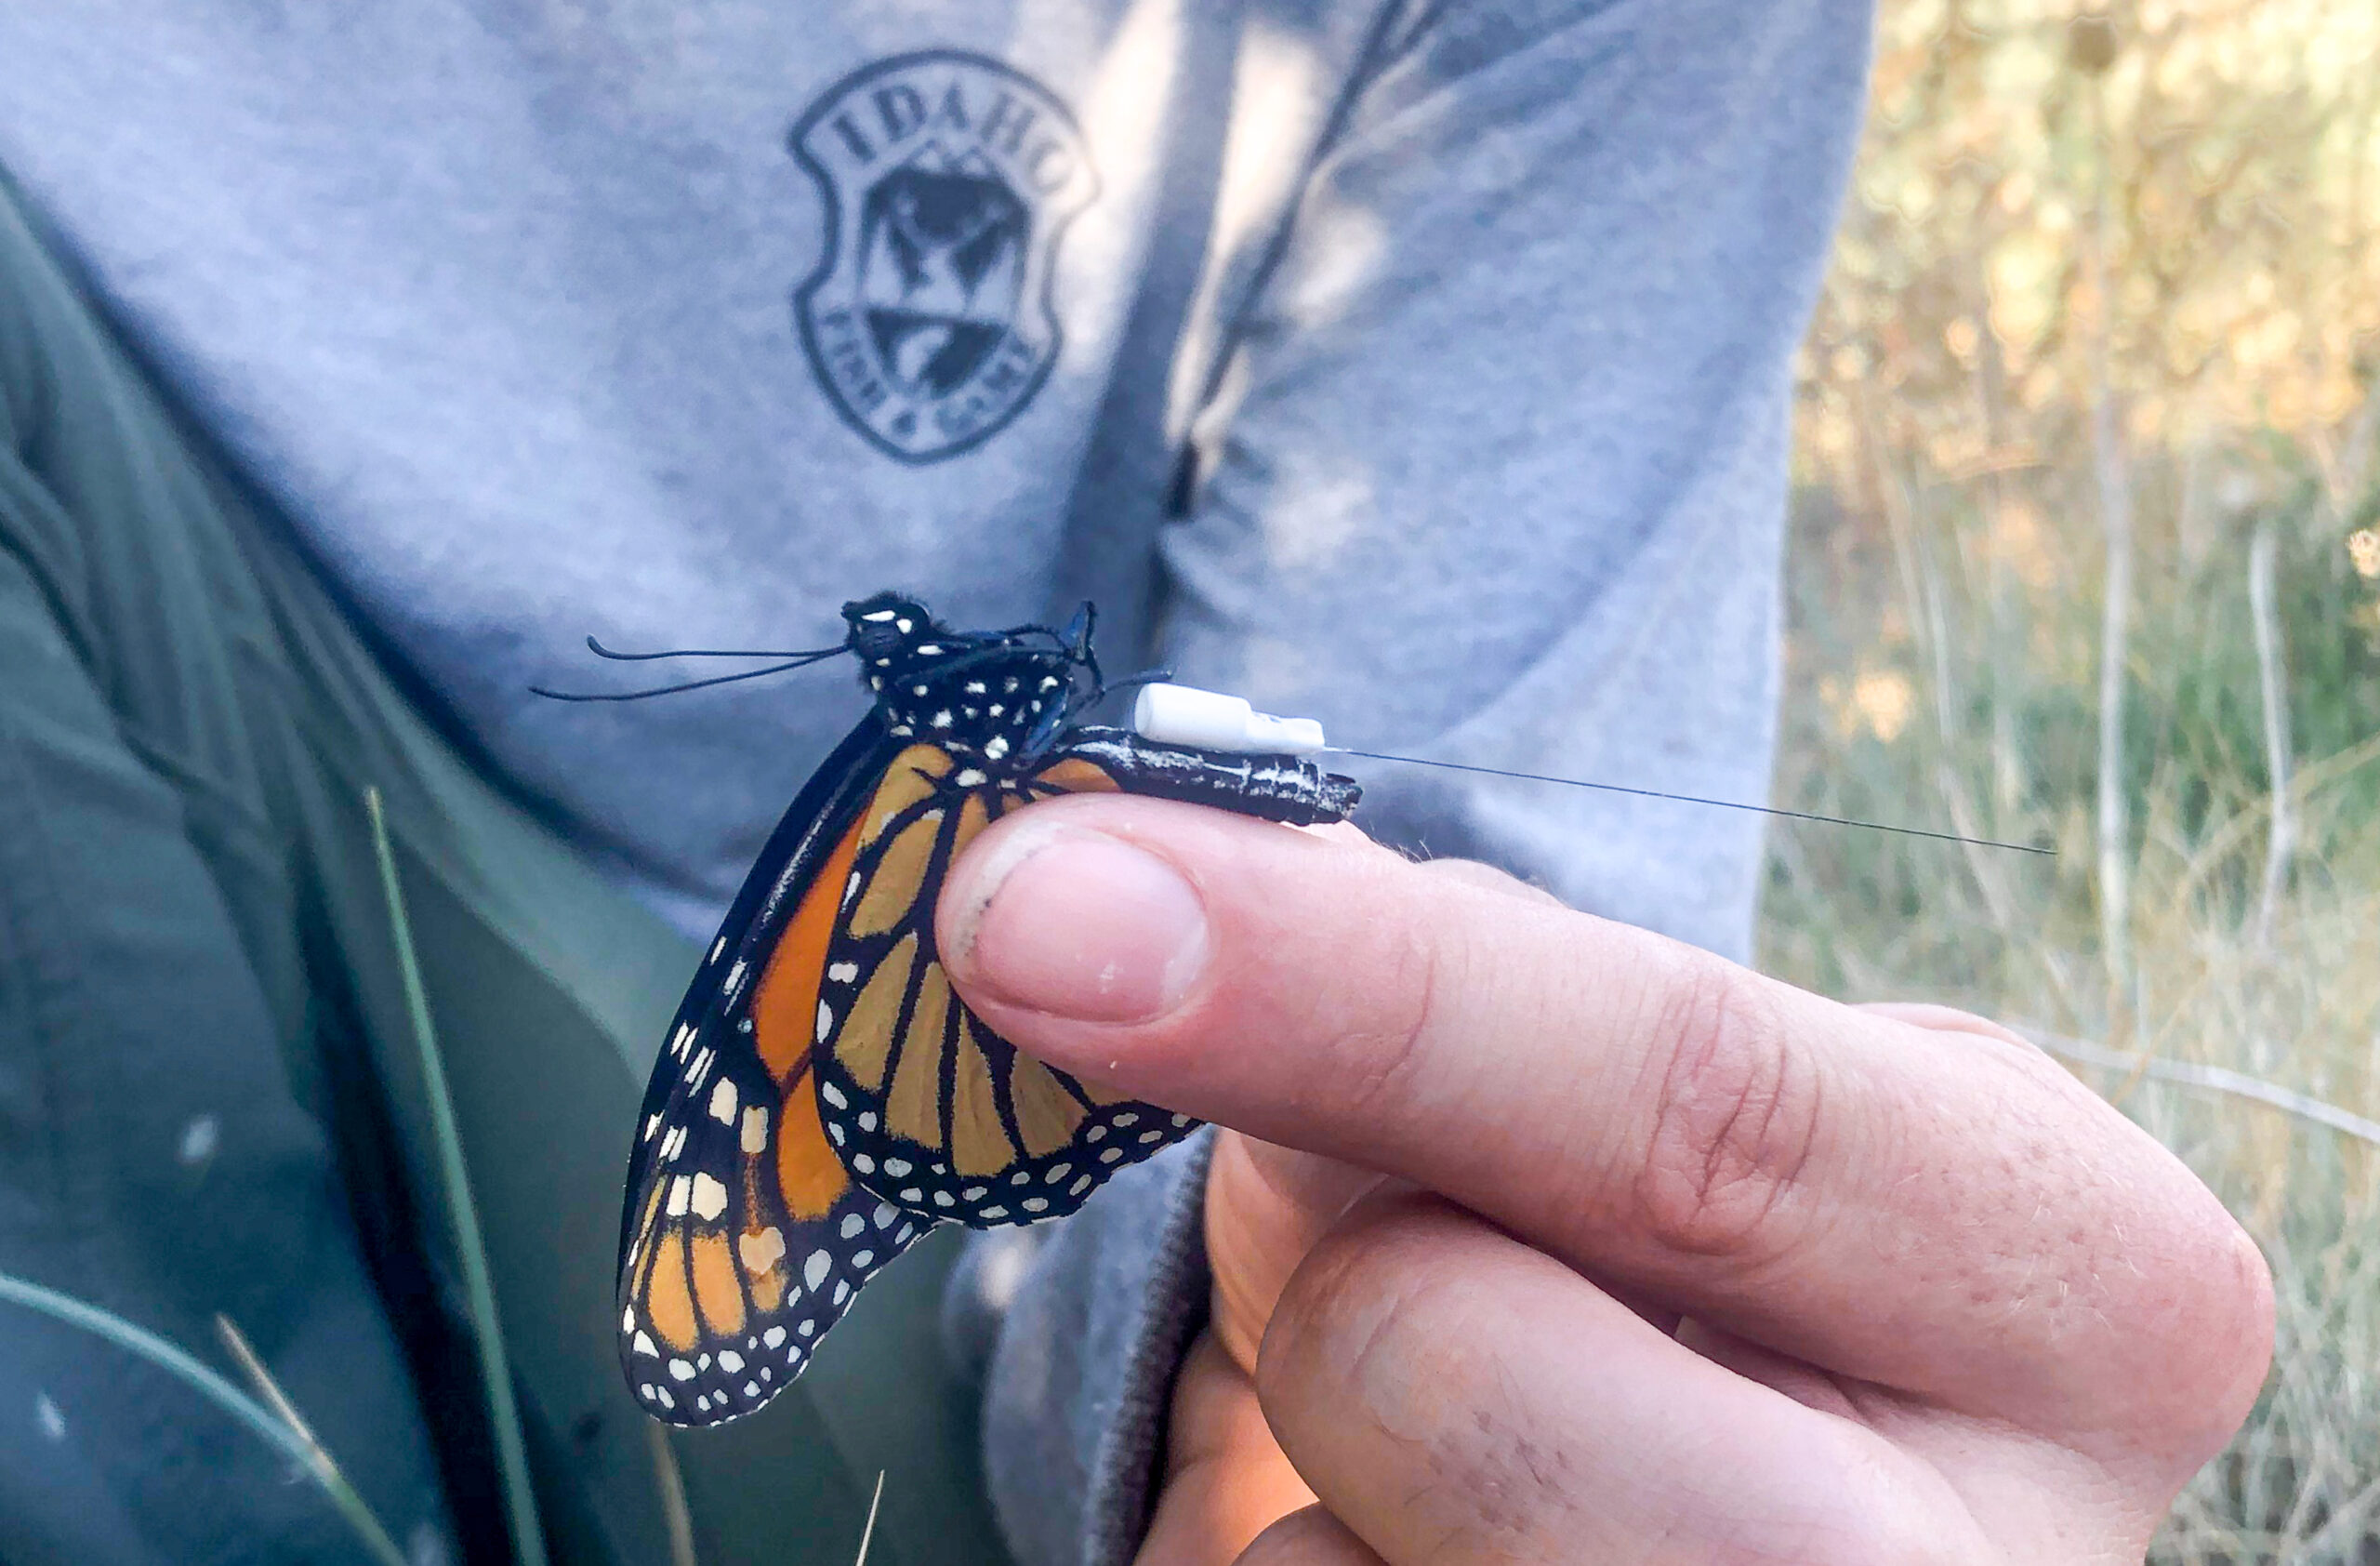 A person in a gray t-shirt with an Idaho Fish and Game logo is gently securing the wings of a beautiful orange monarch butterfly. There is a white surveillance tag with an antenna attached to its abdomen